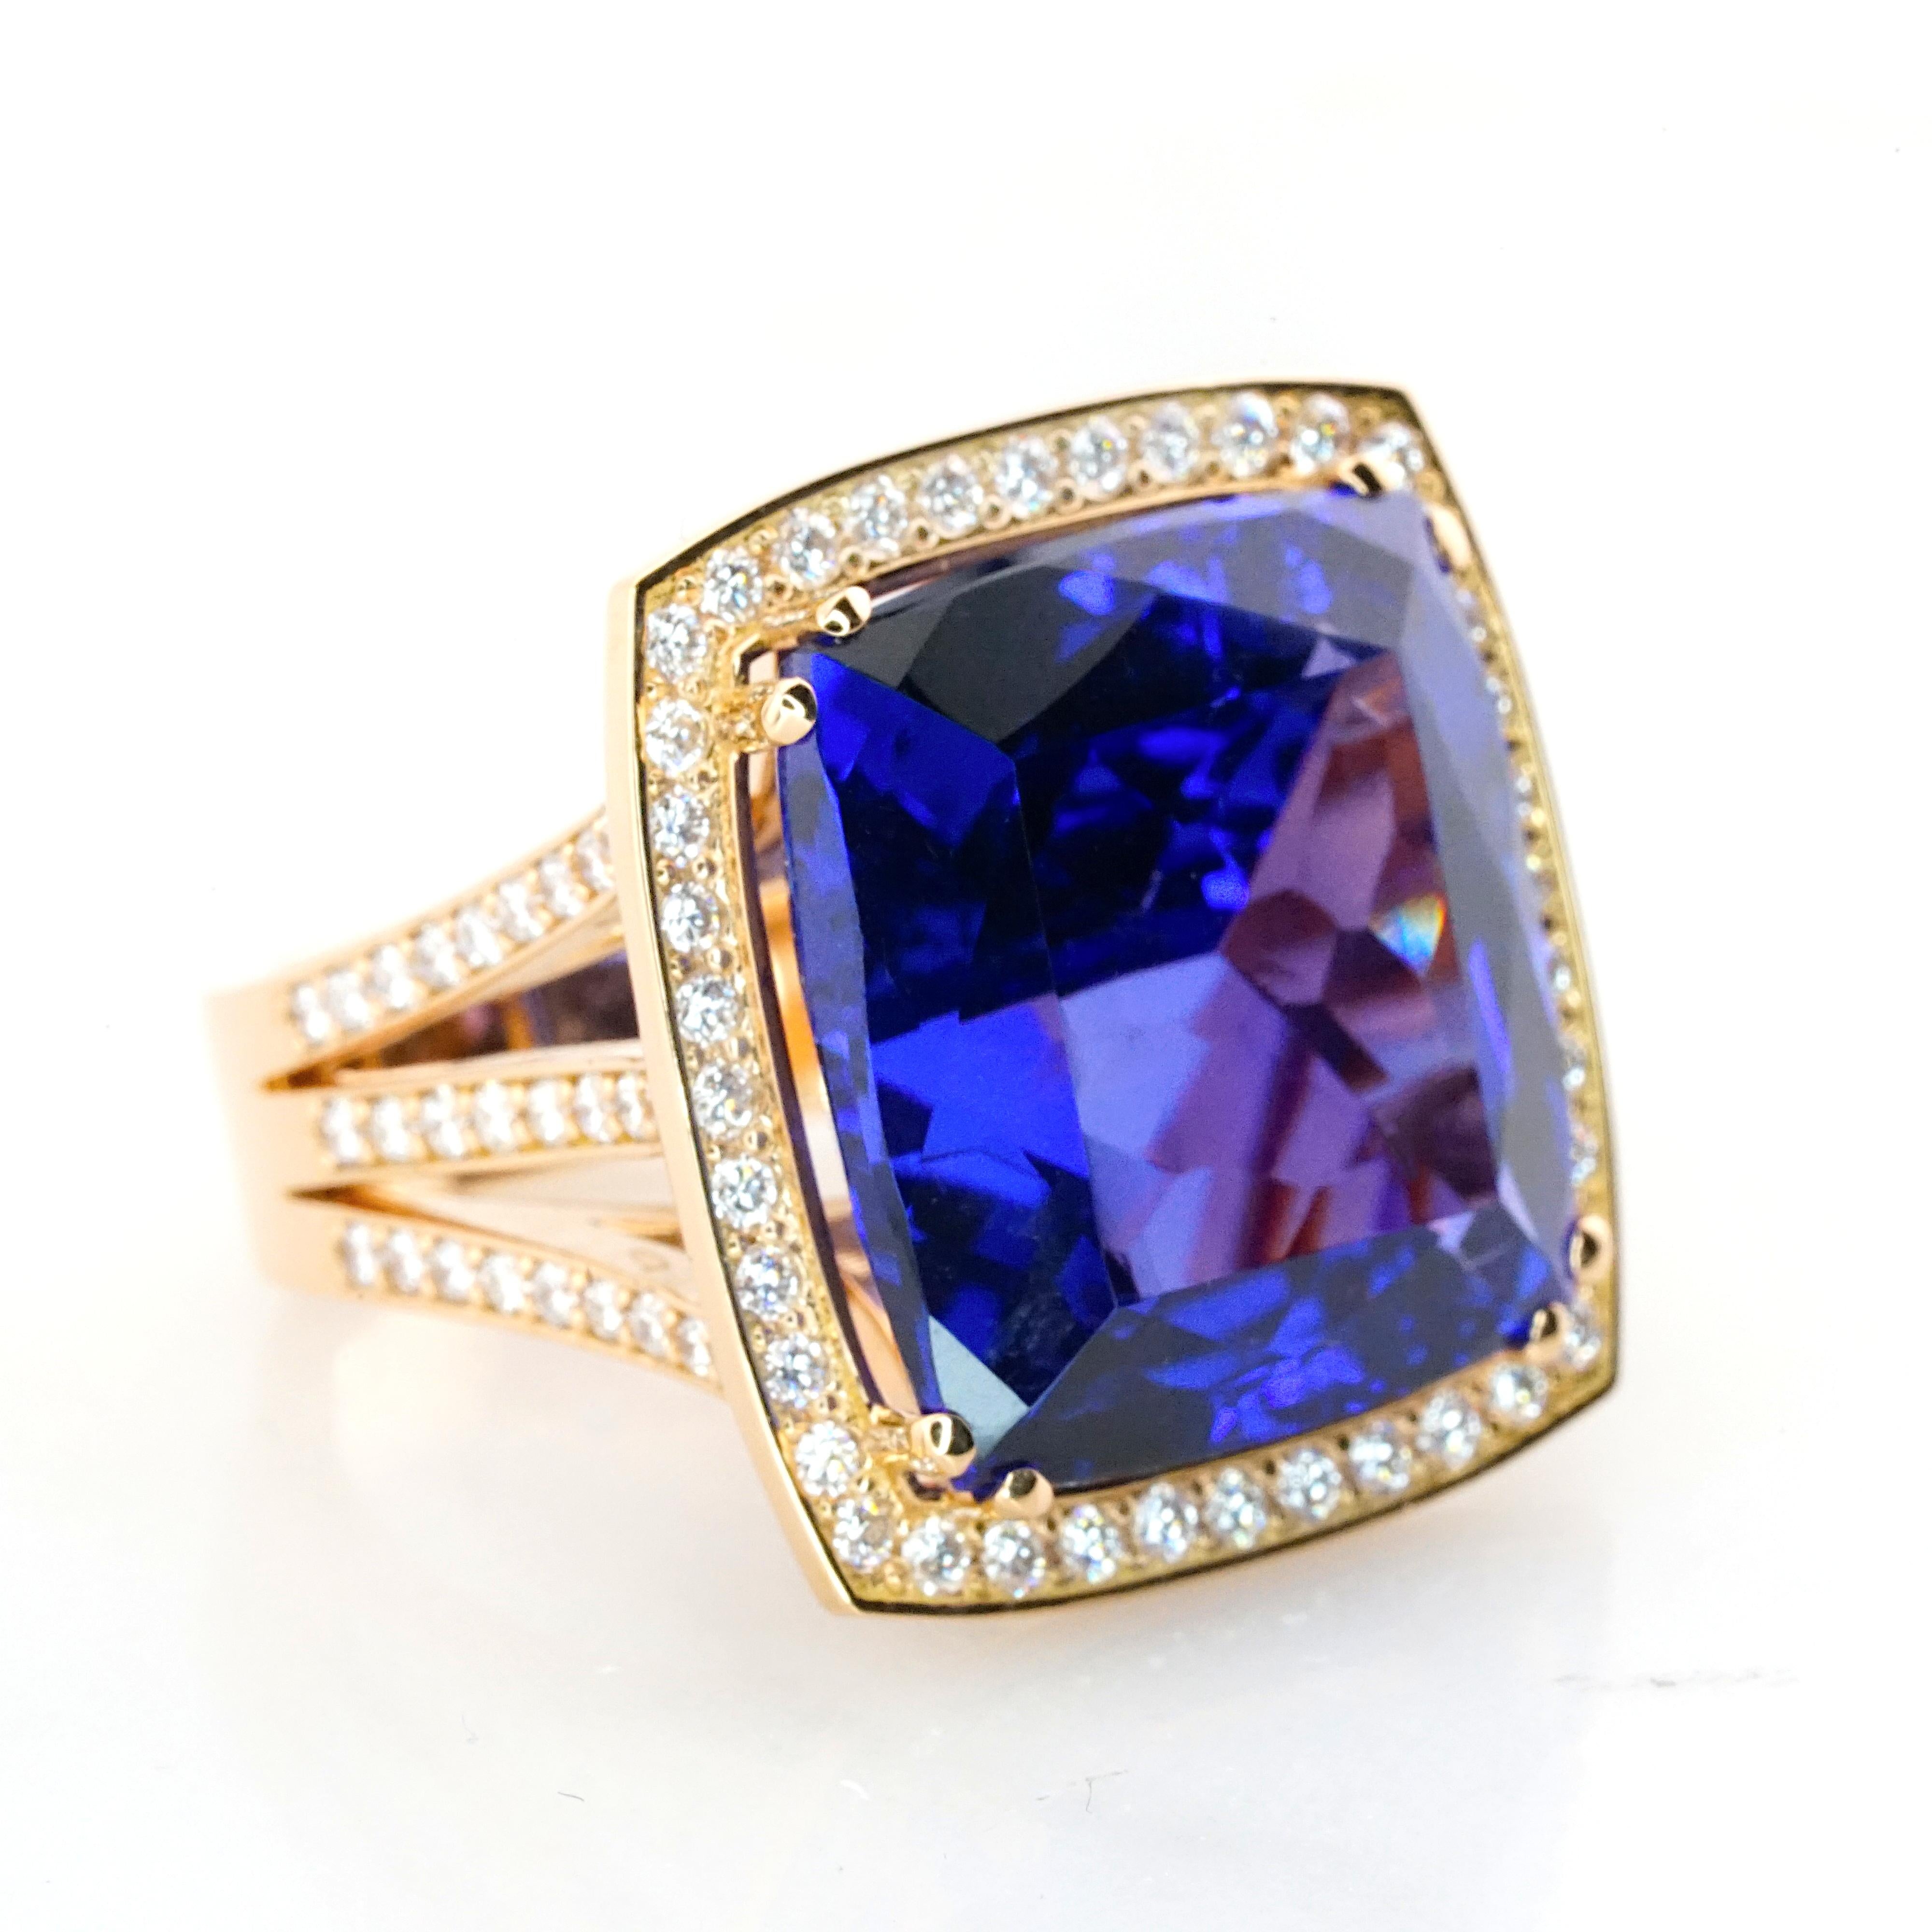 Indulge in opulence with our EGL South Africa Certified 21 Carat Violet Blue AAA+ Tanzanite Ring, elegantly set in 18K Rose Gold. This extraordinary piece is a testament to the allure of rare gemstones and exquisite Italian craftsmanship.

The